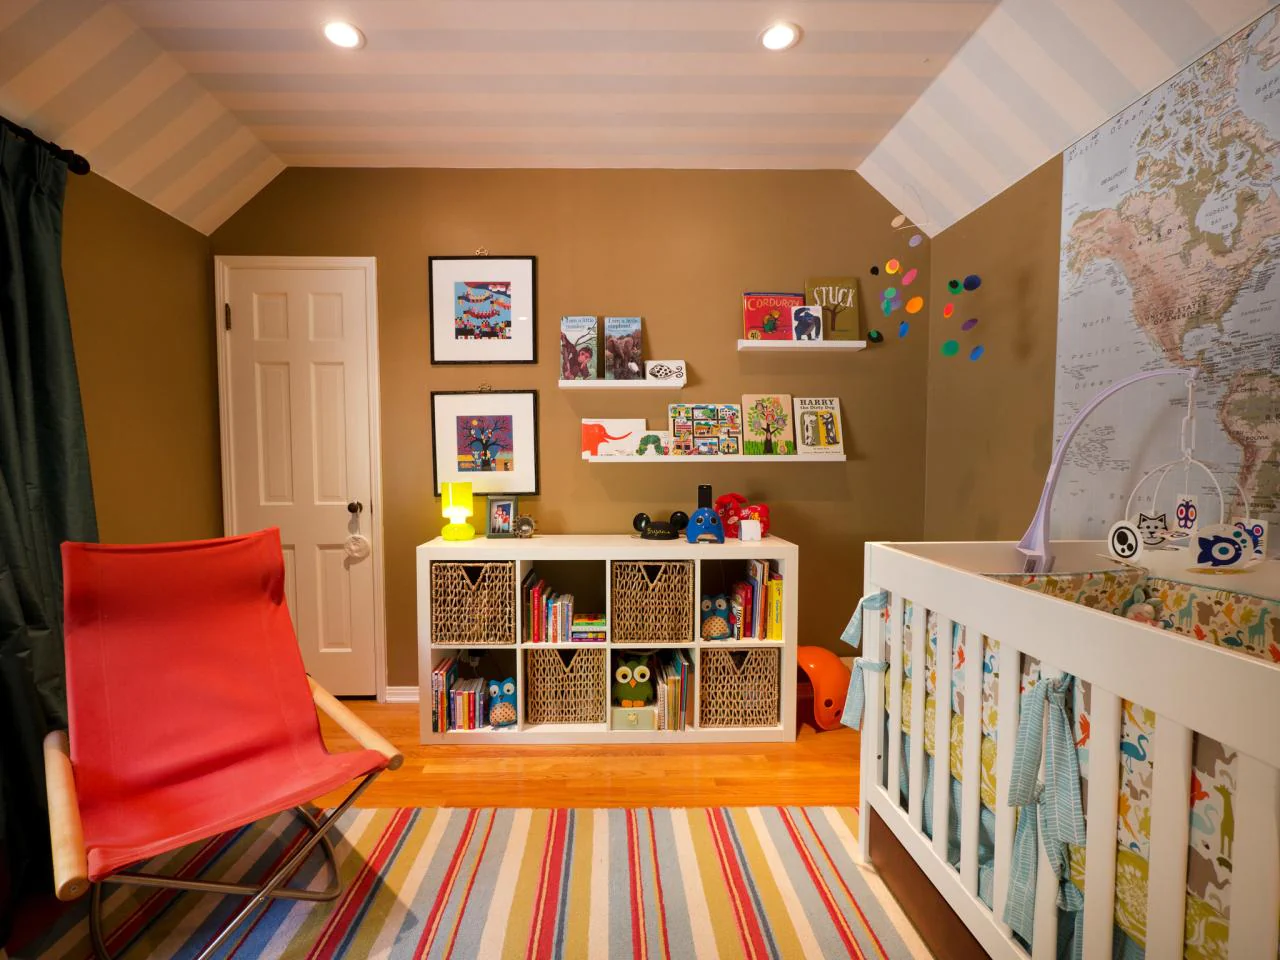 Kids’ Room Paint Ideas: How To Choose Paint For A Child’s Room